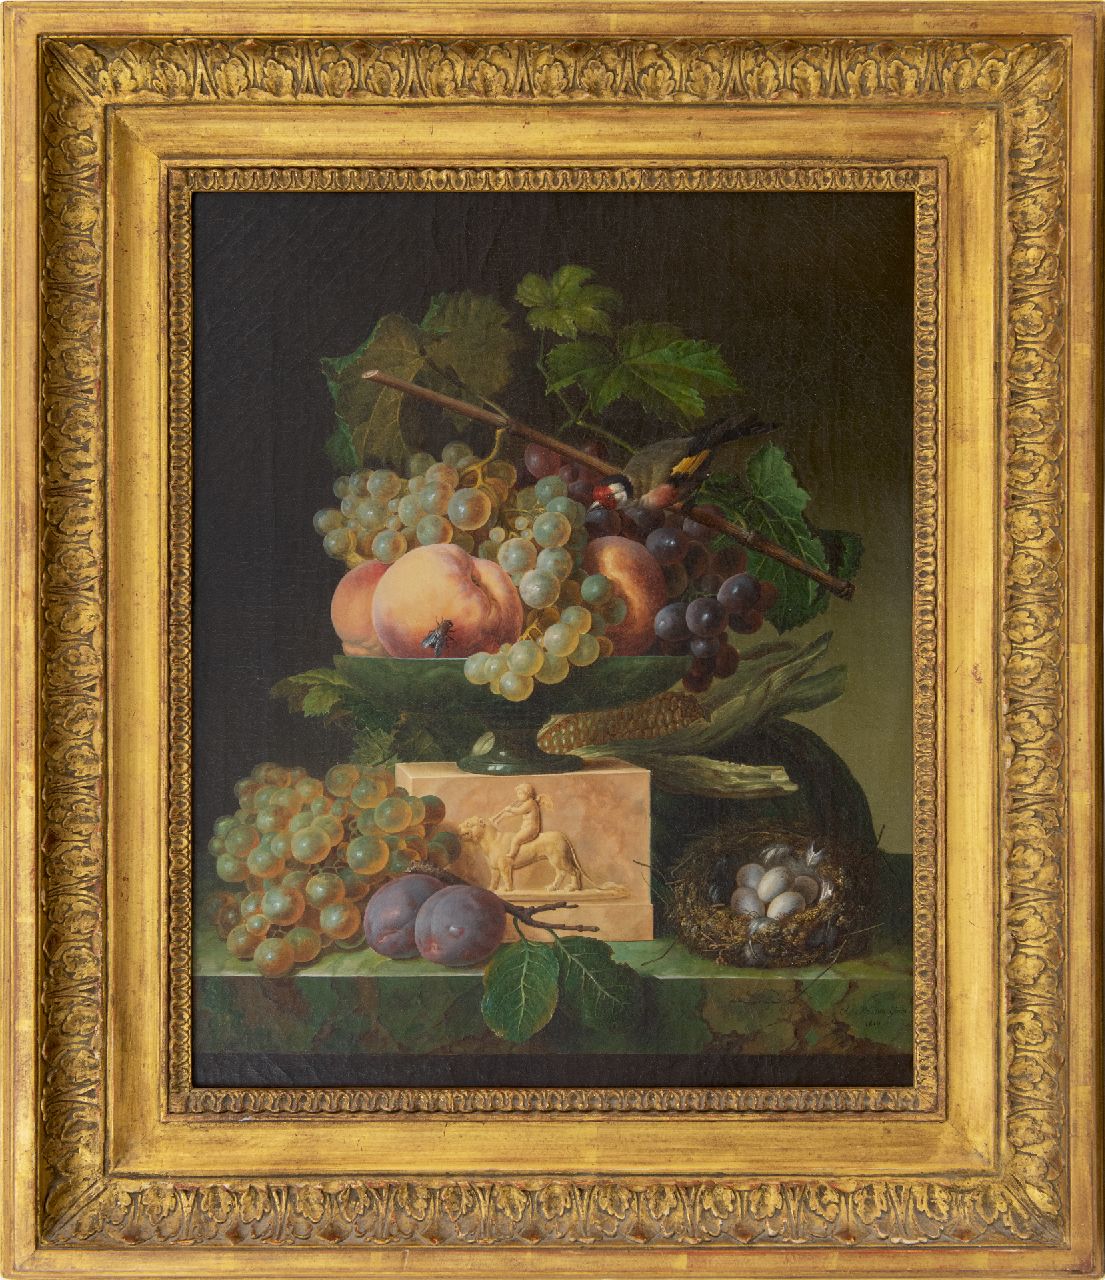 Génin O.M.  | Olympe Mouette Génin | Paintings offered for sale | A still life with grapes, a bird's nest and a goldfinch, oil on canvas 49.2 x 39.8 cm, signed l.r. and dated 1819